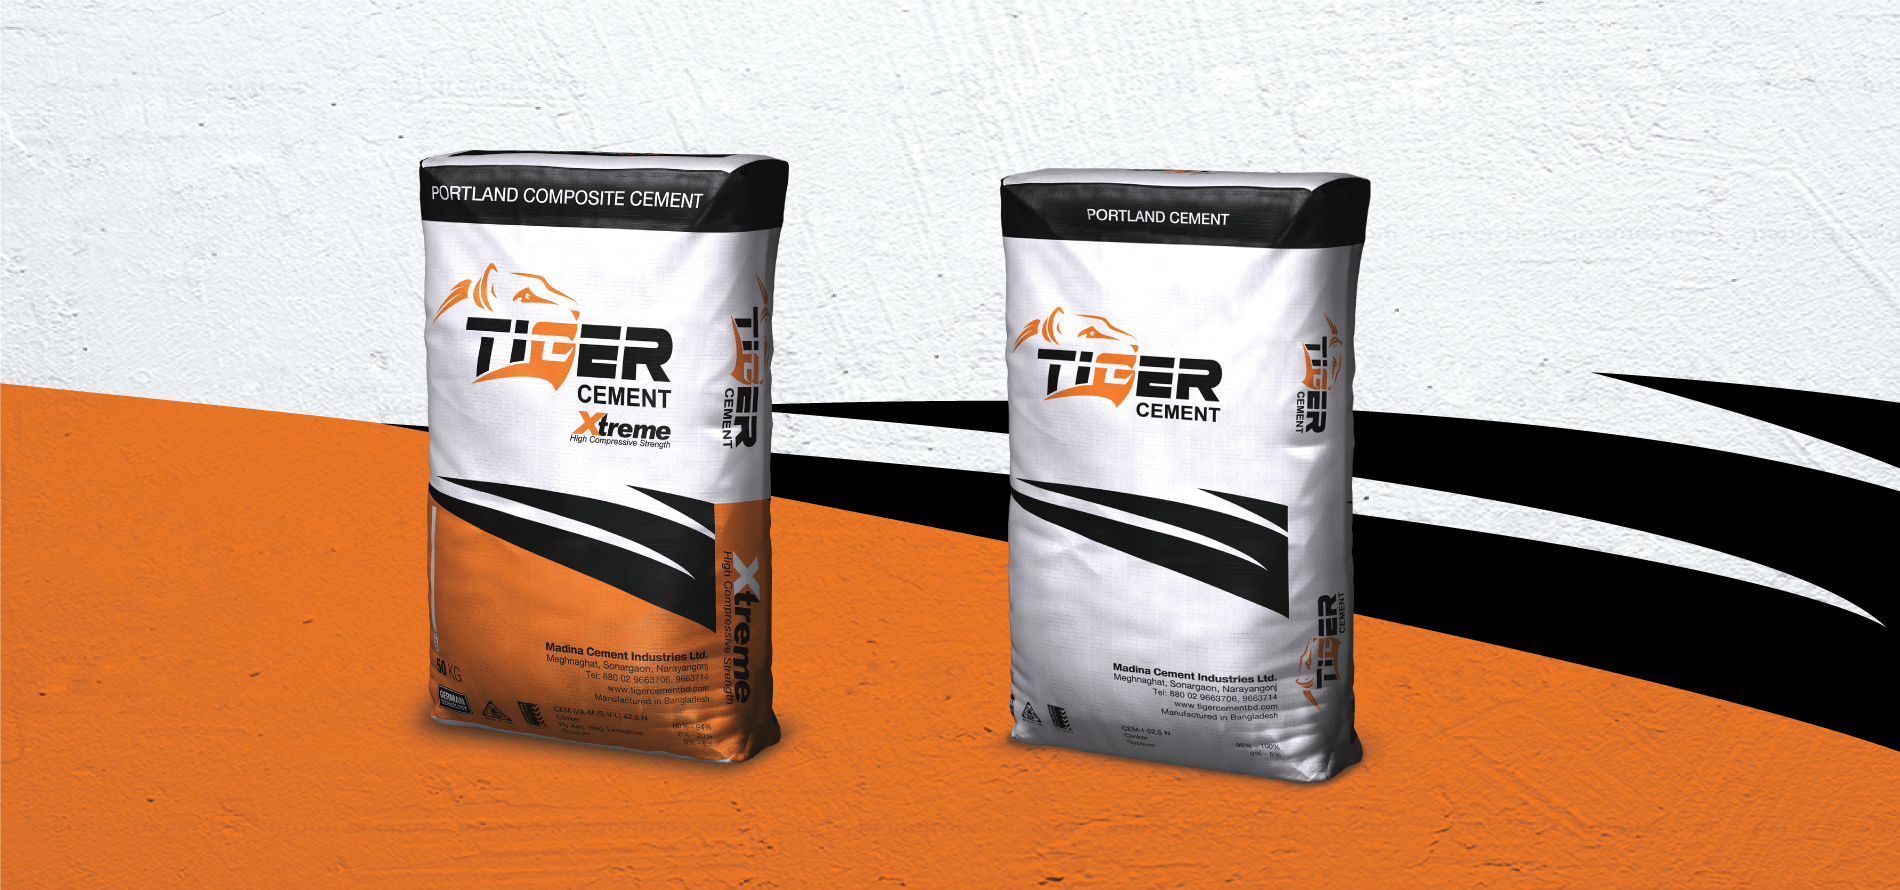 Tiger Cement